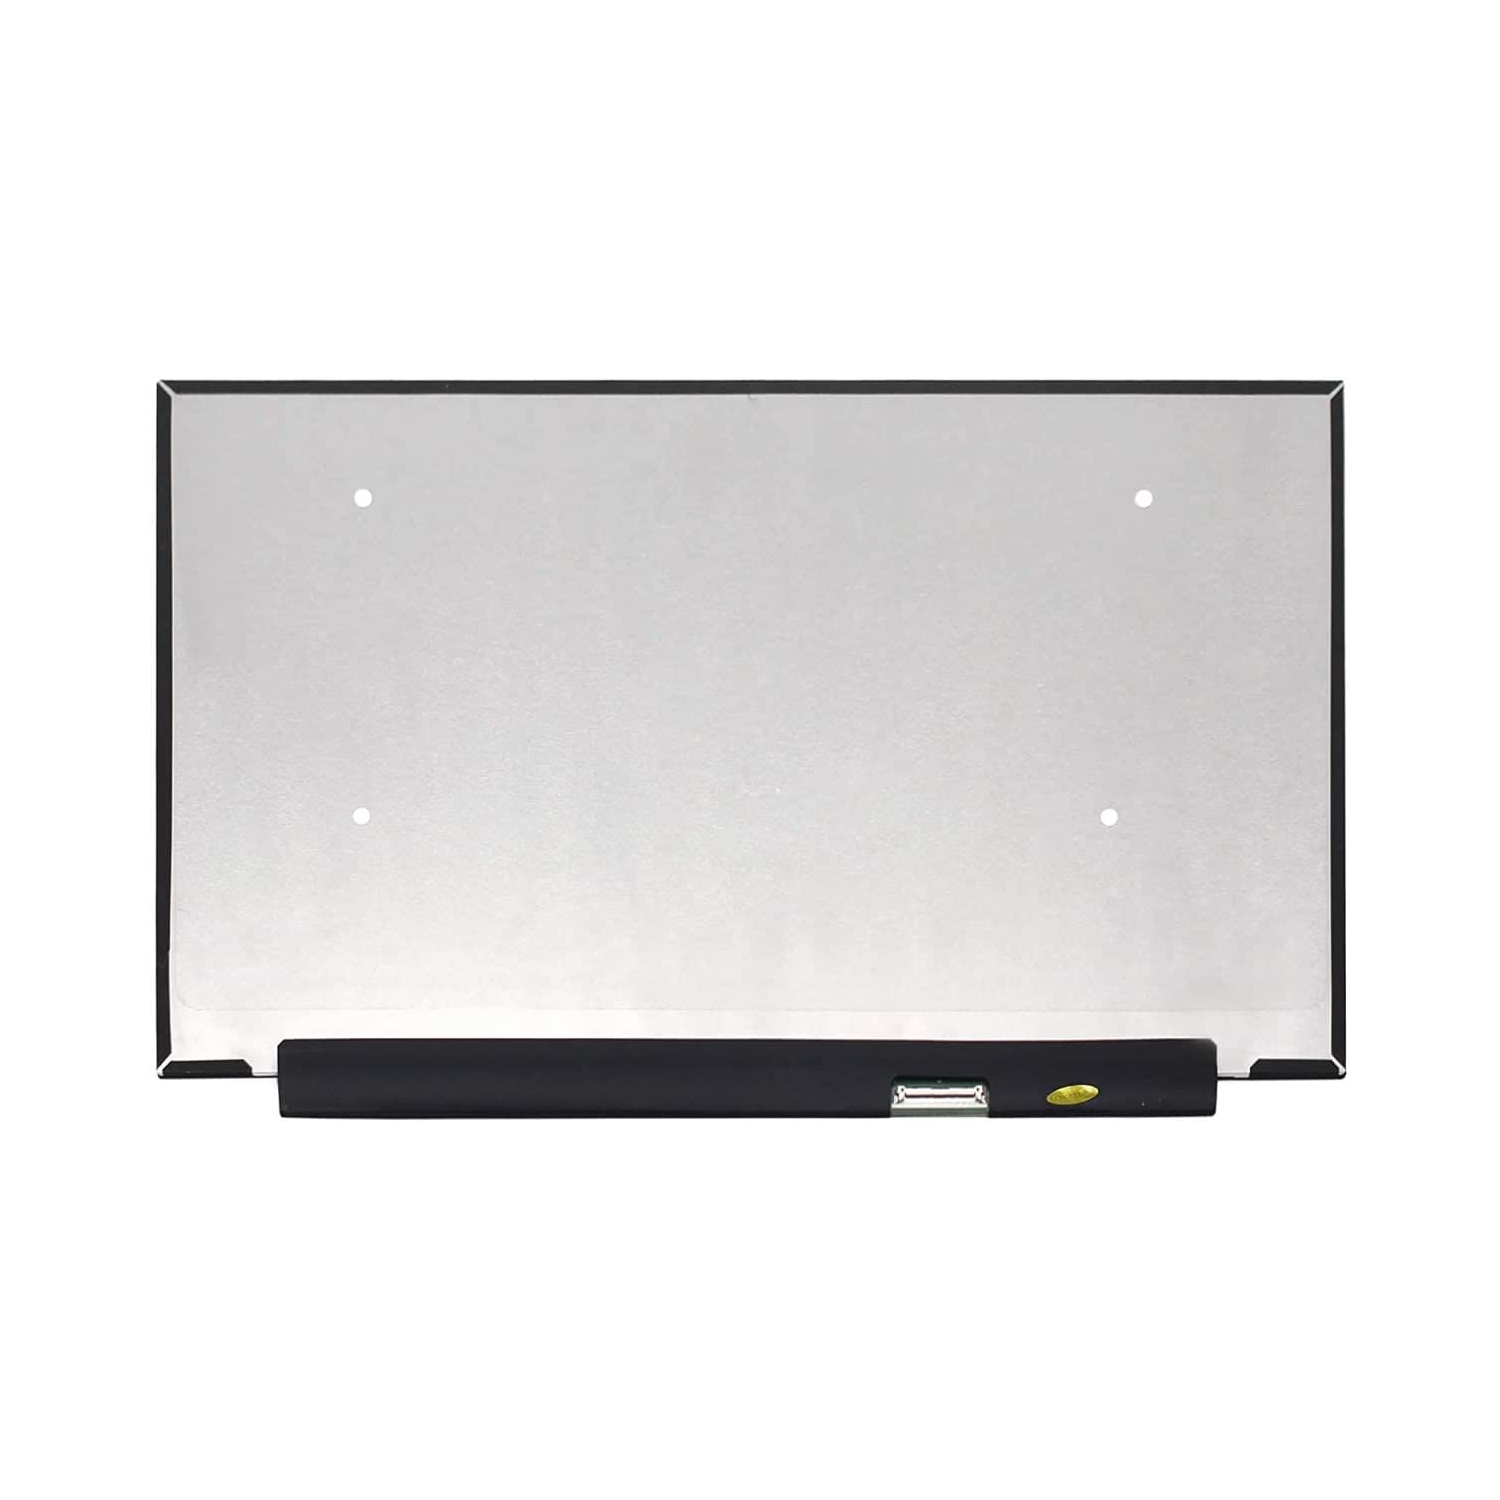 Replacement Screen for HP Elitebook 830 G5 M133NVF3 13.3 INCH 120HZ FHD IPS LCD LED Laptop Screen (1920 X 1080, 40 PIN EDP)- Open Box